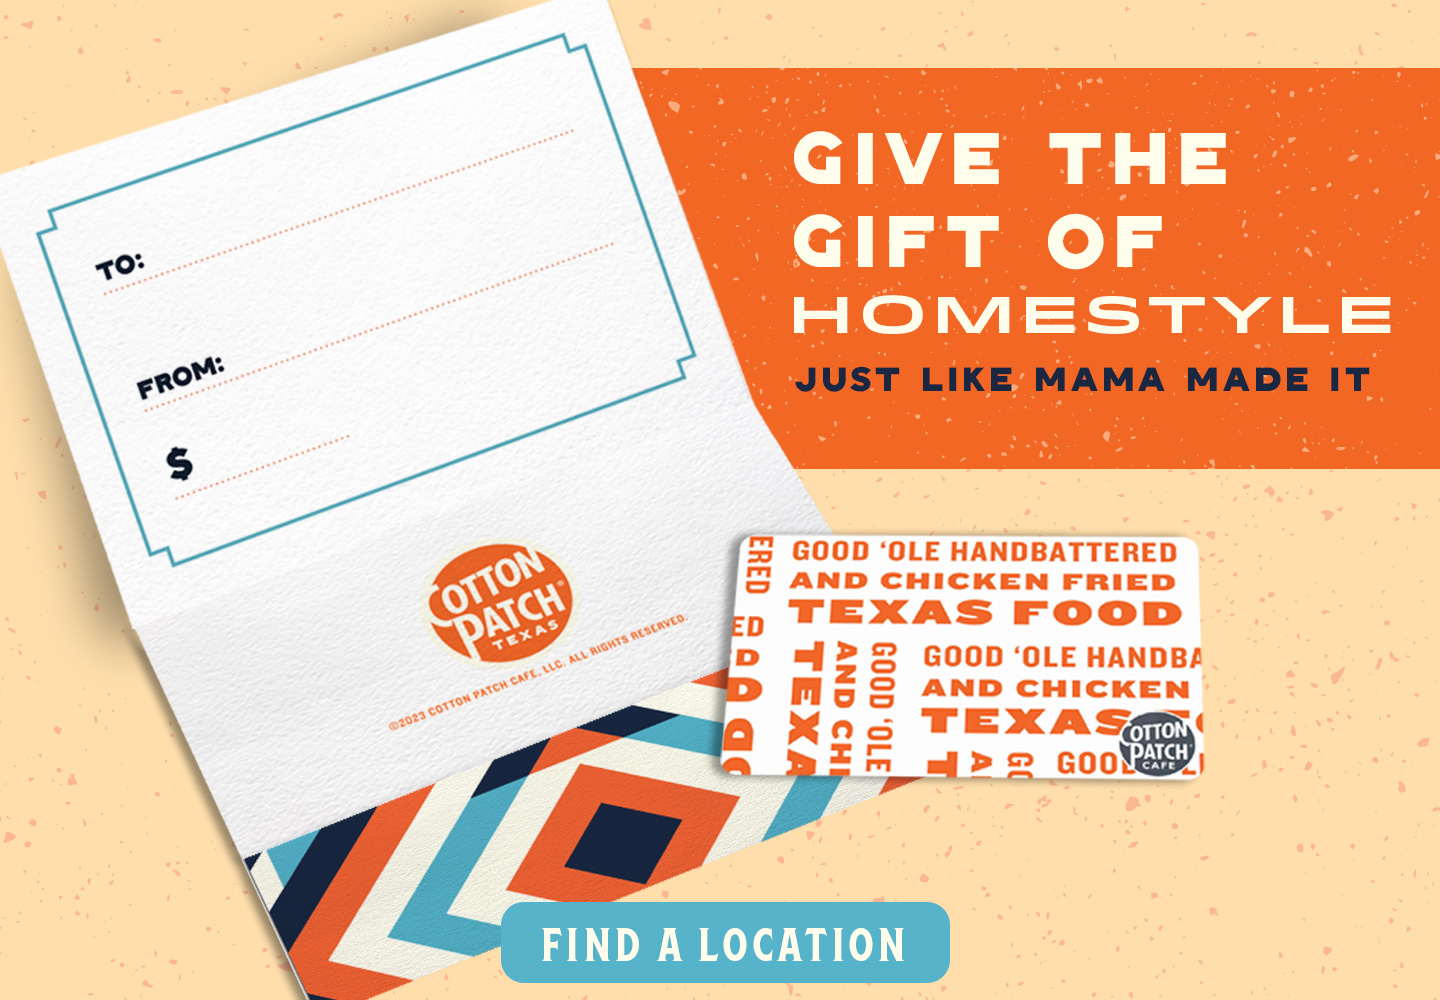 Church's Chicken Gift Cards and Gift Certificate - 7525 Hwy 105, Beaumont,  TX